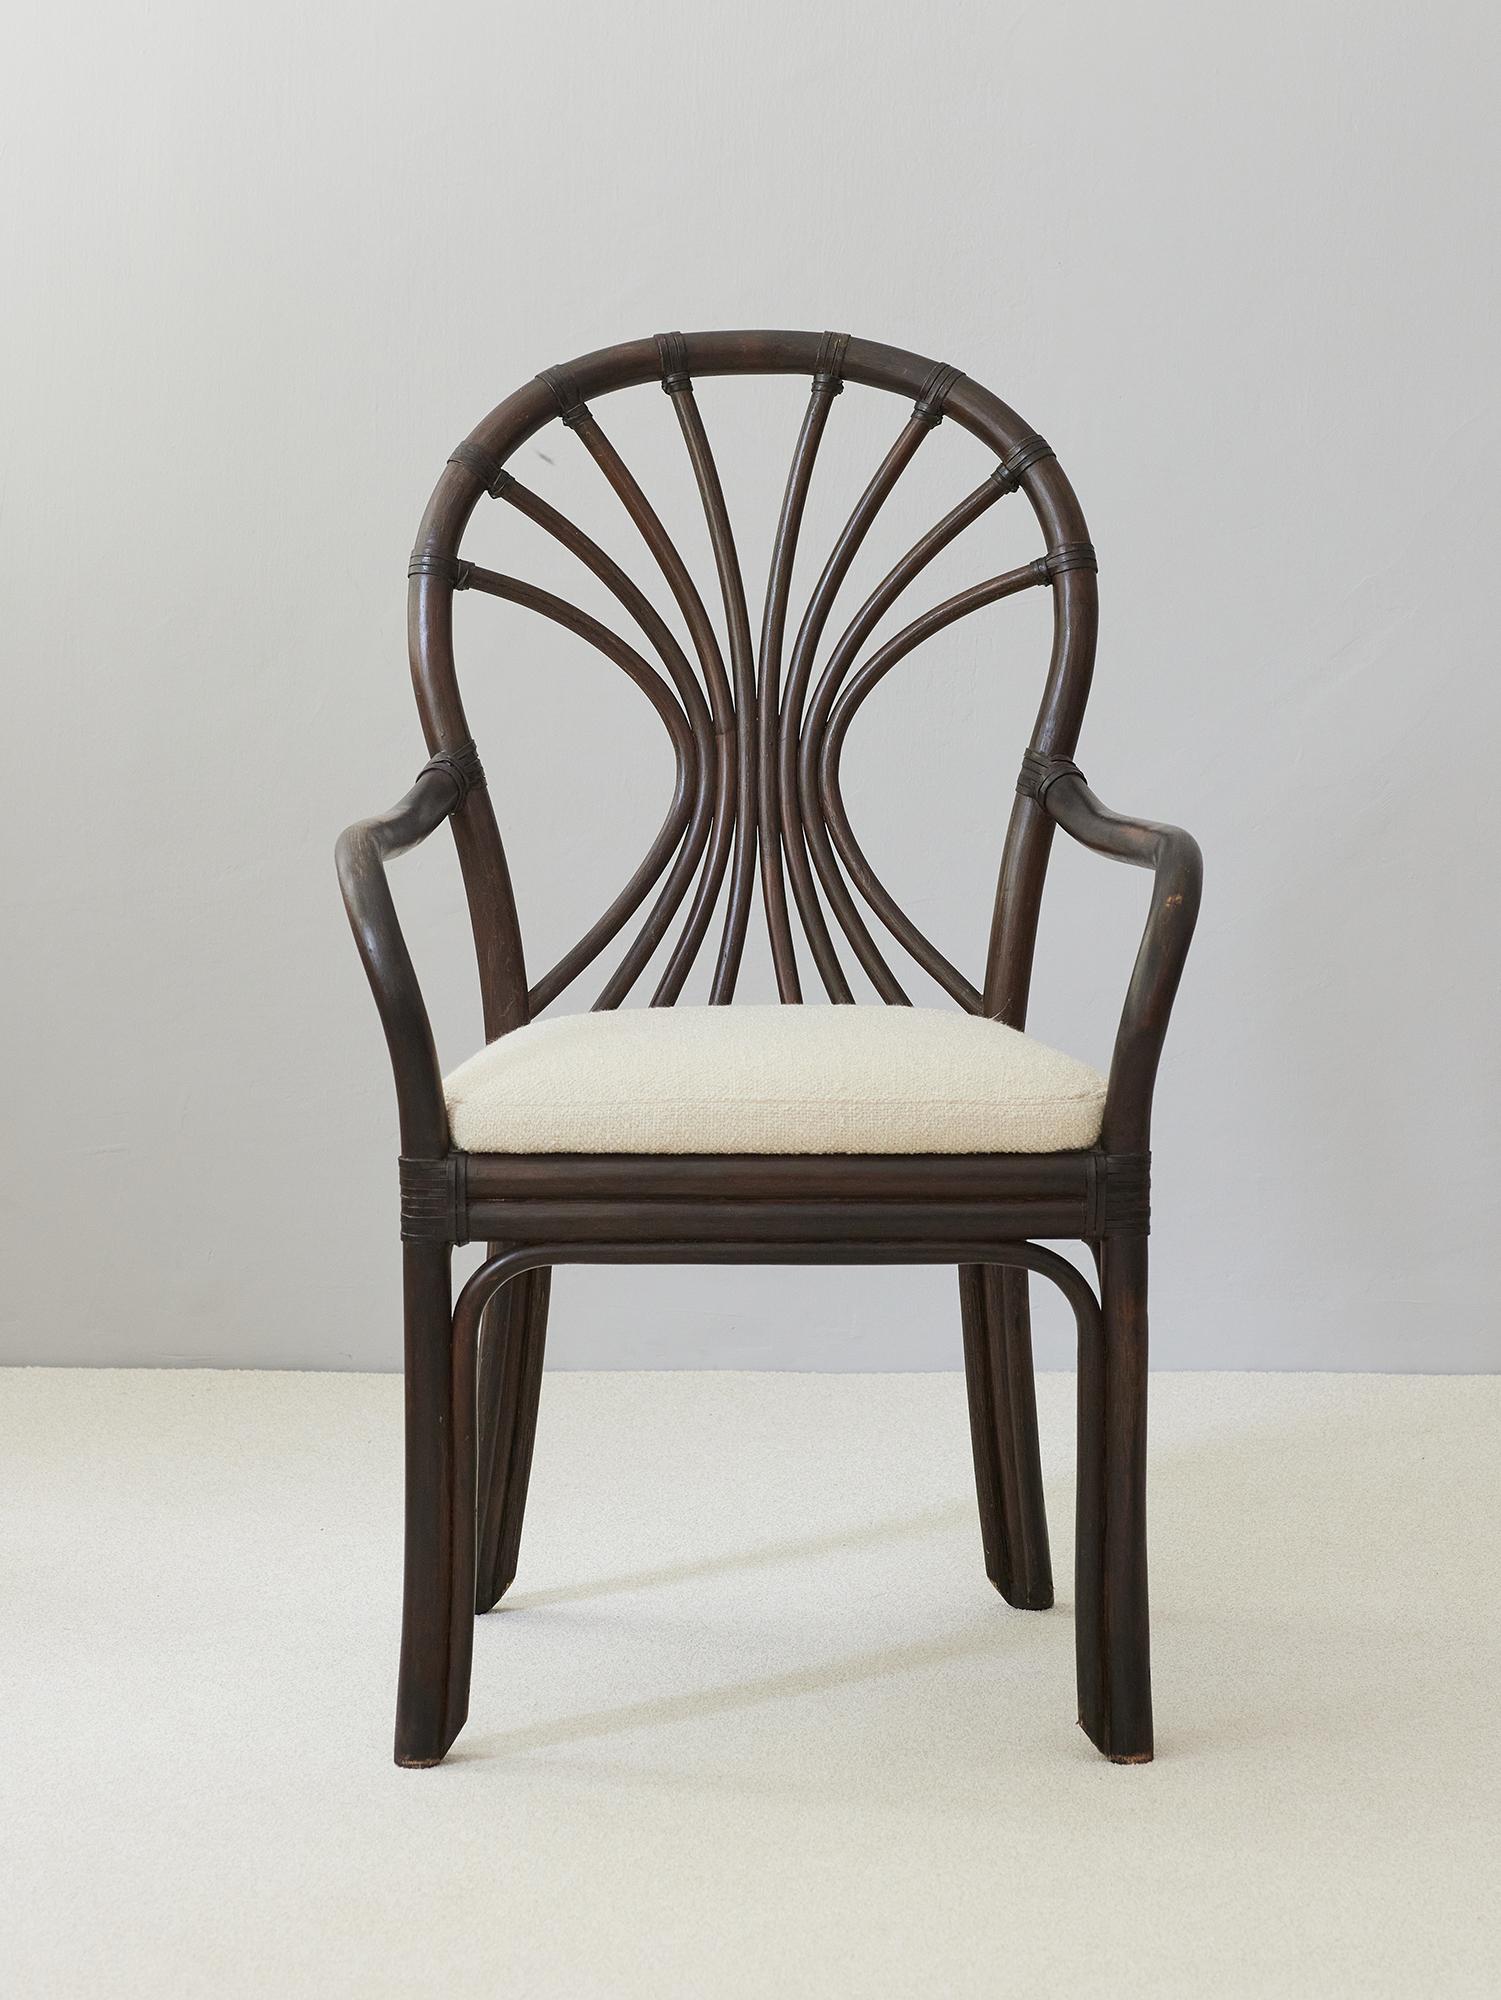 This  handcrafted mid century  Swiss vintage organic modern bent rattan armchair made in the bistro cafe art nouveau style. Gracefully curved arms conjoined to a newly upholstered seat .
Wear consistent with age and use. Minor losses.